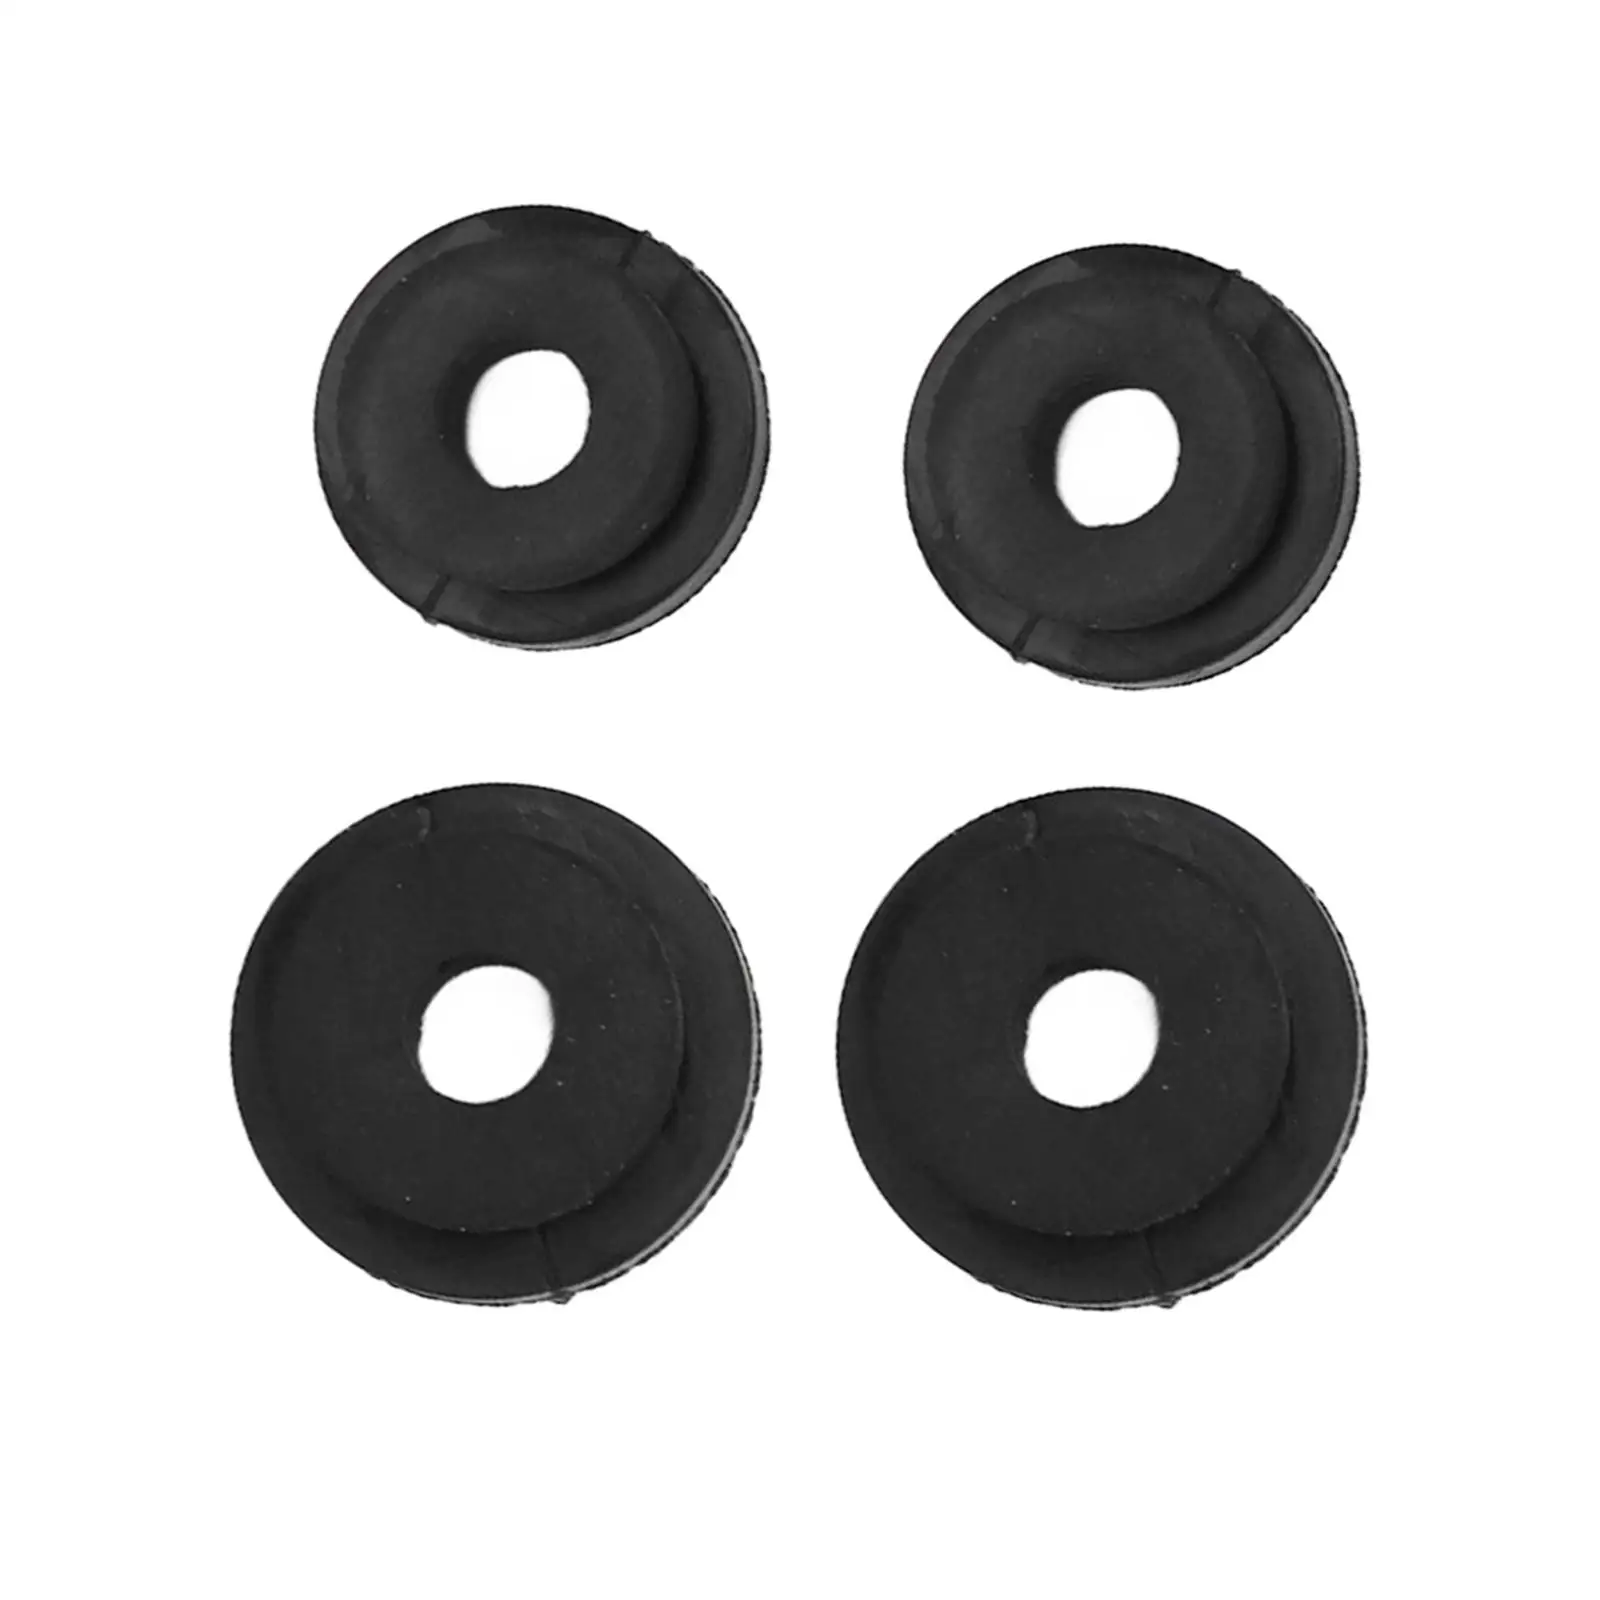 4Pcs Radiator Mounting Rubber Grommets Anti Shaking Replaces Accessories Nrc5544 572312 for Land Rover Defender Discovery 1